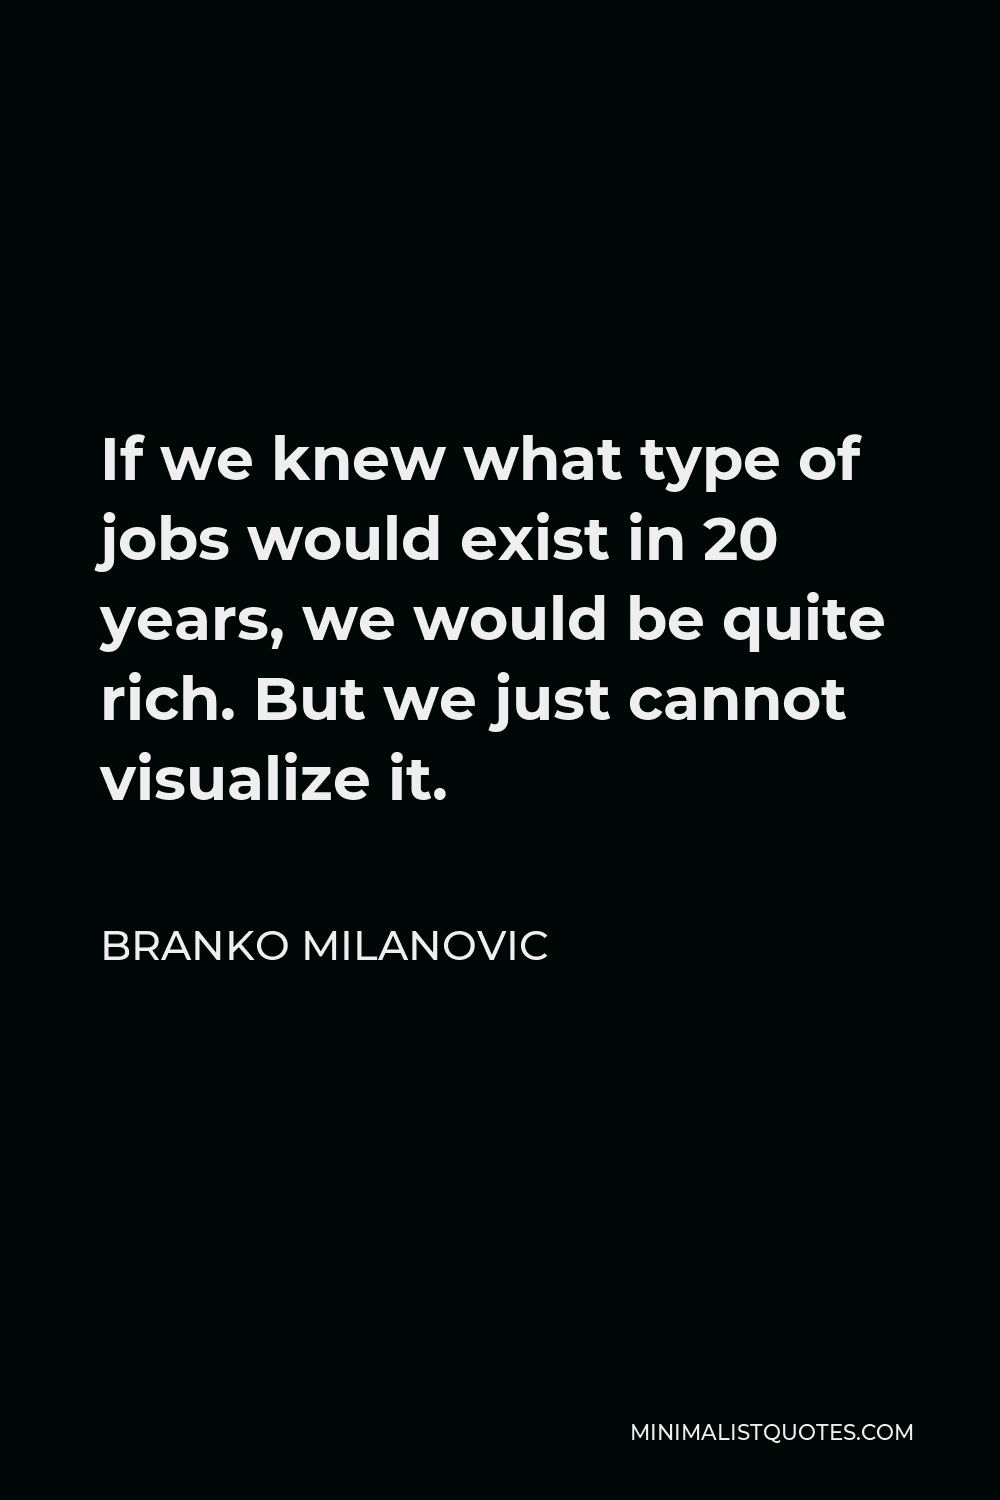 Branko Milanovic Quote - If we knew what type of jobs would exist in 20 years, we would be quite rich. But we just cannot visualize it.